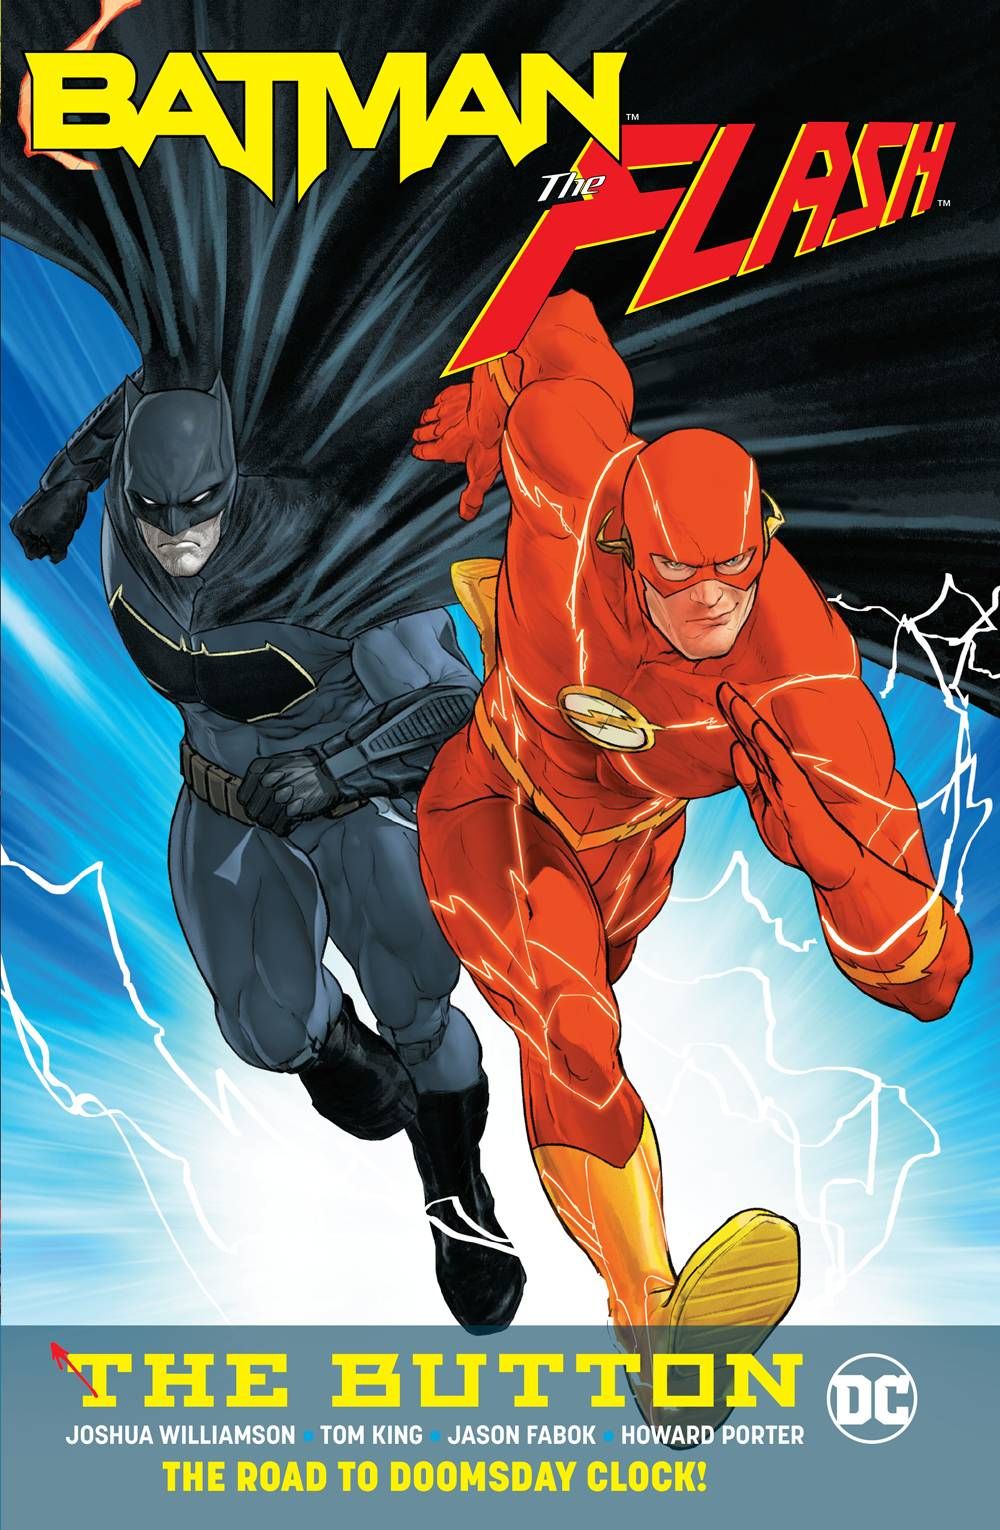 <p>Ironic as it may seem, The Flash was slow coming to the silver screen. One of the oldest and most consistently popular superheroes in all of comics, The Flash has enjoyed plenty of popularity outside of comic books. A mainstay on the beloved <em>Super Friends</em> and <em>Justice League </em>cartoons, The Flash had a cult hit live-action show in 1990 and a long-running live-action show on the CW network, which just ended its ninth and final season. When Ezra Miller took up the role for 2016’s <em>Batman v Superman: Dawn of Justice</em> and 2017’s <em>Justice League</em>, the speedy superhero was set to finally get his own big-budget solo movie. </p><p>Five years later, <em>The Flash</em> is finally coming to theaters, slowed but not stopped by director changes, Miller’s legal troubles, and a full universe redirection. It seems to have all worked out for the best, as the time-travel shenanigans of Miller’s Barry Allen allow the DC Universe to reboot, inaugurating a <a href="https://www.menshealth.com/entertainment/a42733434/new-dc-movies-tv-shows-release-dates/">new cinematic universe under the direction of James Gunn and Peter Safran</a>. But first, Barry has to fix a universe without General Zod, returning to the world of 2013’s <em>Man of Steel</em>, this time with the help of both Ben Affleck and Michael Keaton as Batman, as well as Sasha Calle as Supergirl. </p><p>Turns out, visiting multiverses and reshaping universes is an everyday activity for The Flash. If you want to catch up on the reality-twisting world of the fastest man alive, check out these great Flash comics.</p>